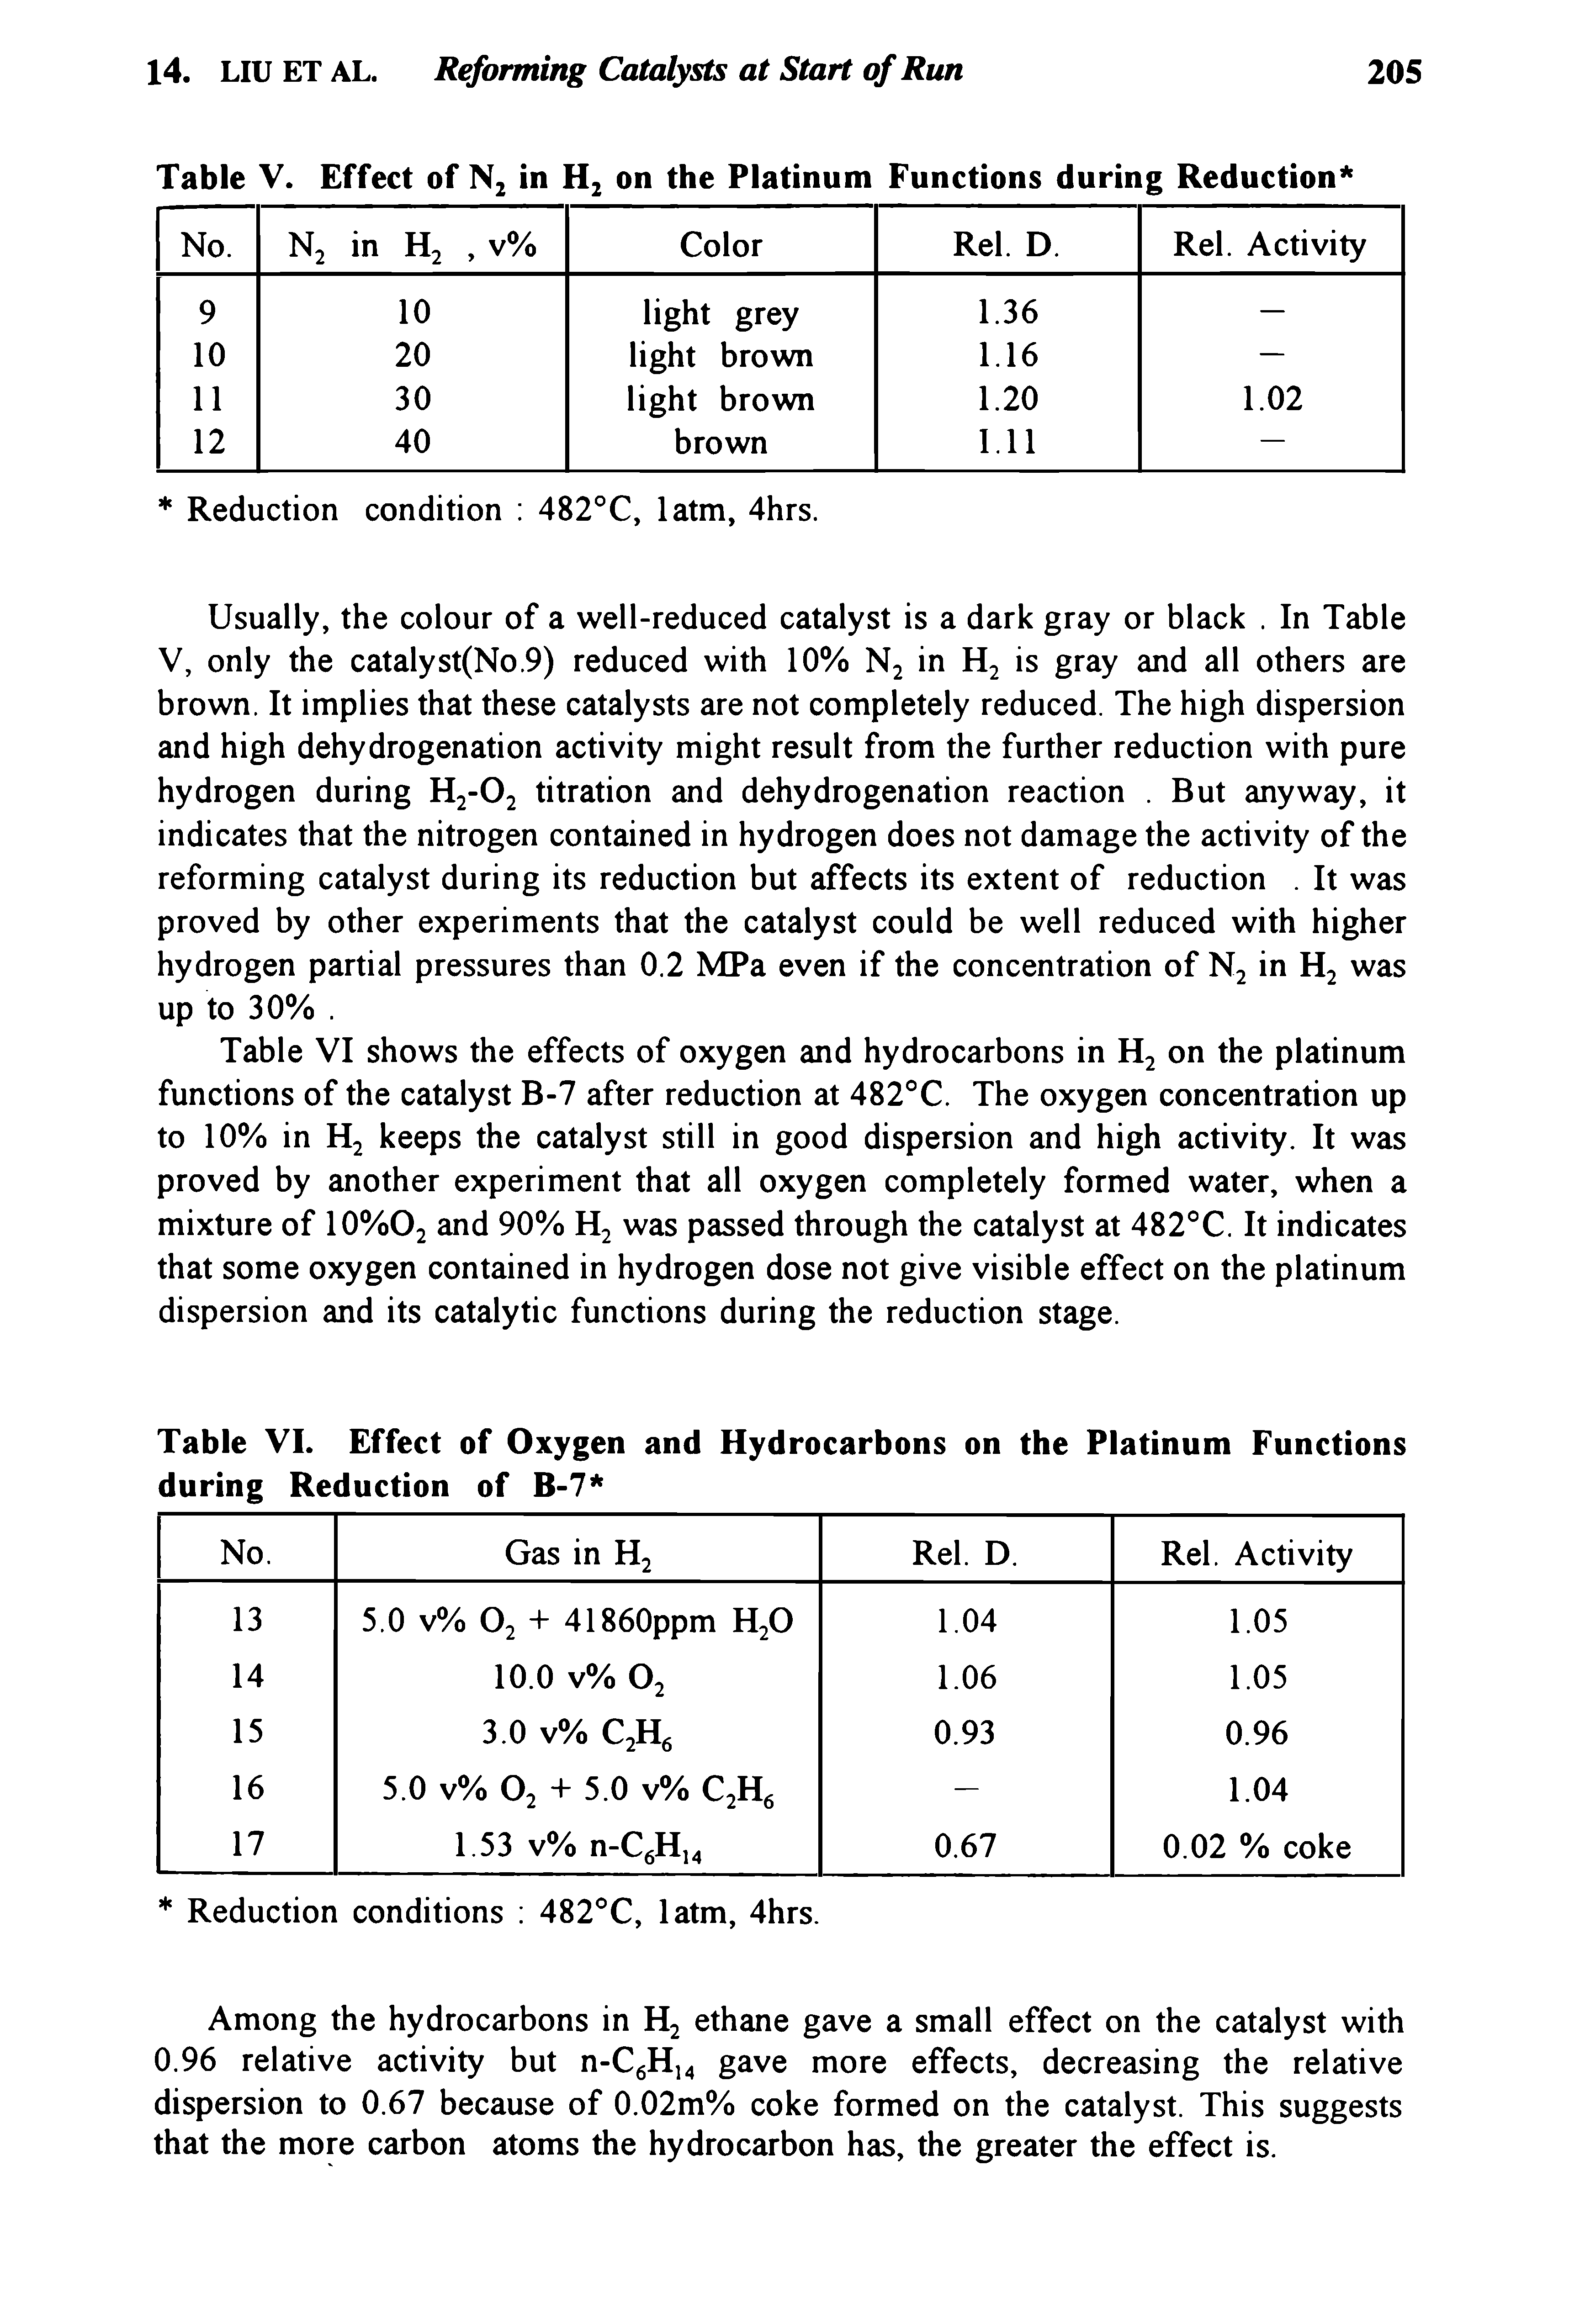 Table VI shows the effects of oxygen and hydrocarbons in H2 on the platinum functions of the catalyst B-7 after reduction at 482°C. The oxygen concentration up to 10% in H2 keeps the catalyst still in good dispersion and high activity. It was proved by another experiment that all oxygen completely formed water, when a mixture of 10%O2 and 90% H2 was passed through the catalyst at 482°C. It indicates that some oxygen contained in hydrogen dose not give visible effect on the platinum dispersion and its catalytic functions during the reduction stage.